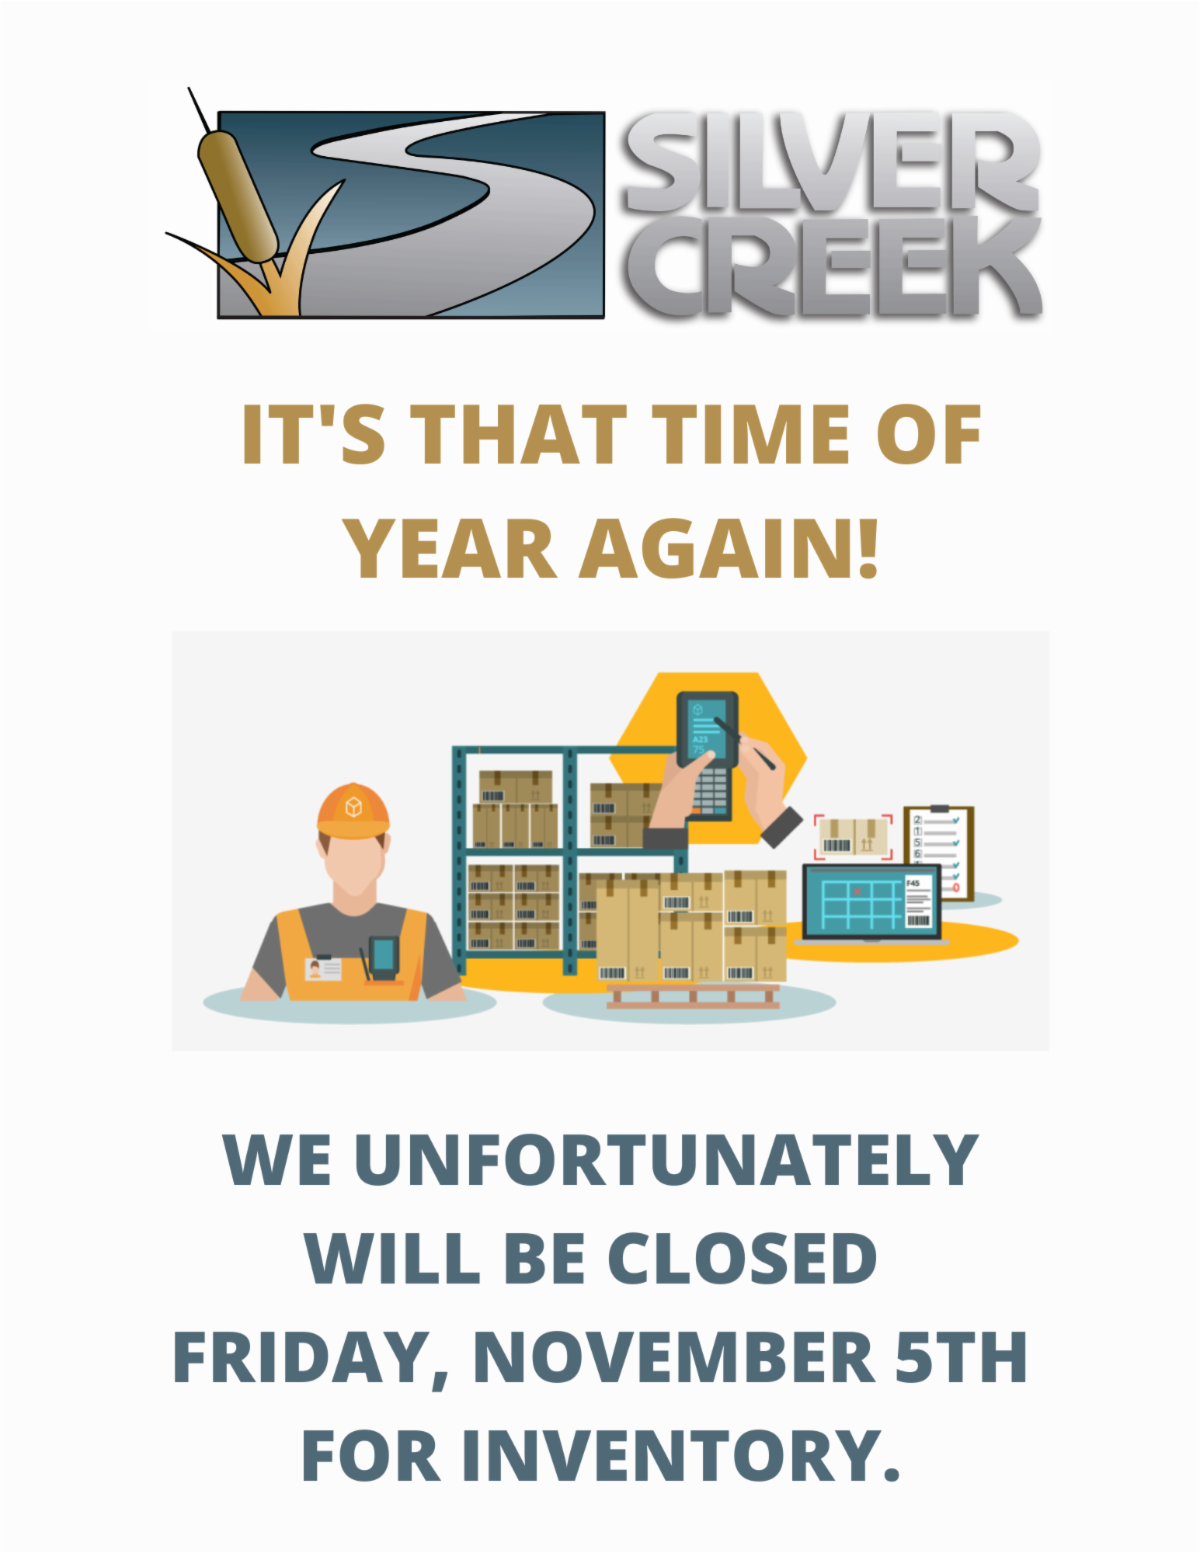 Silver Creek Supply branch locations will be closed on Friday, November 5, 2021, for inventory